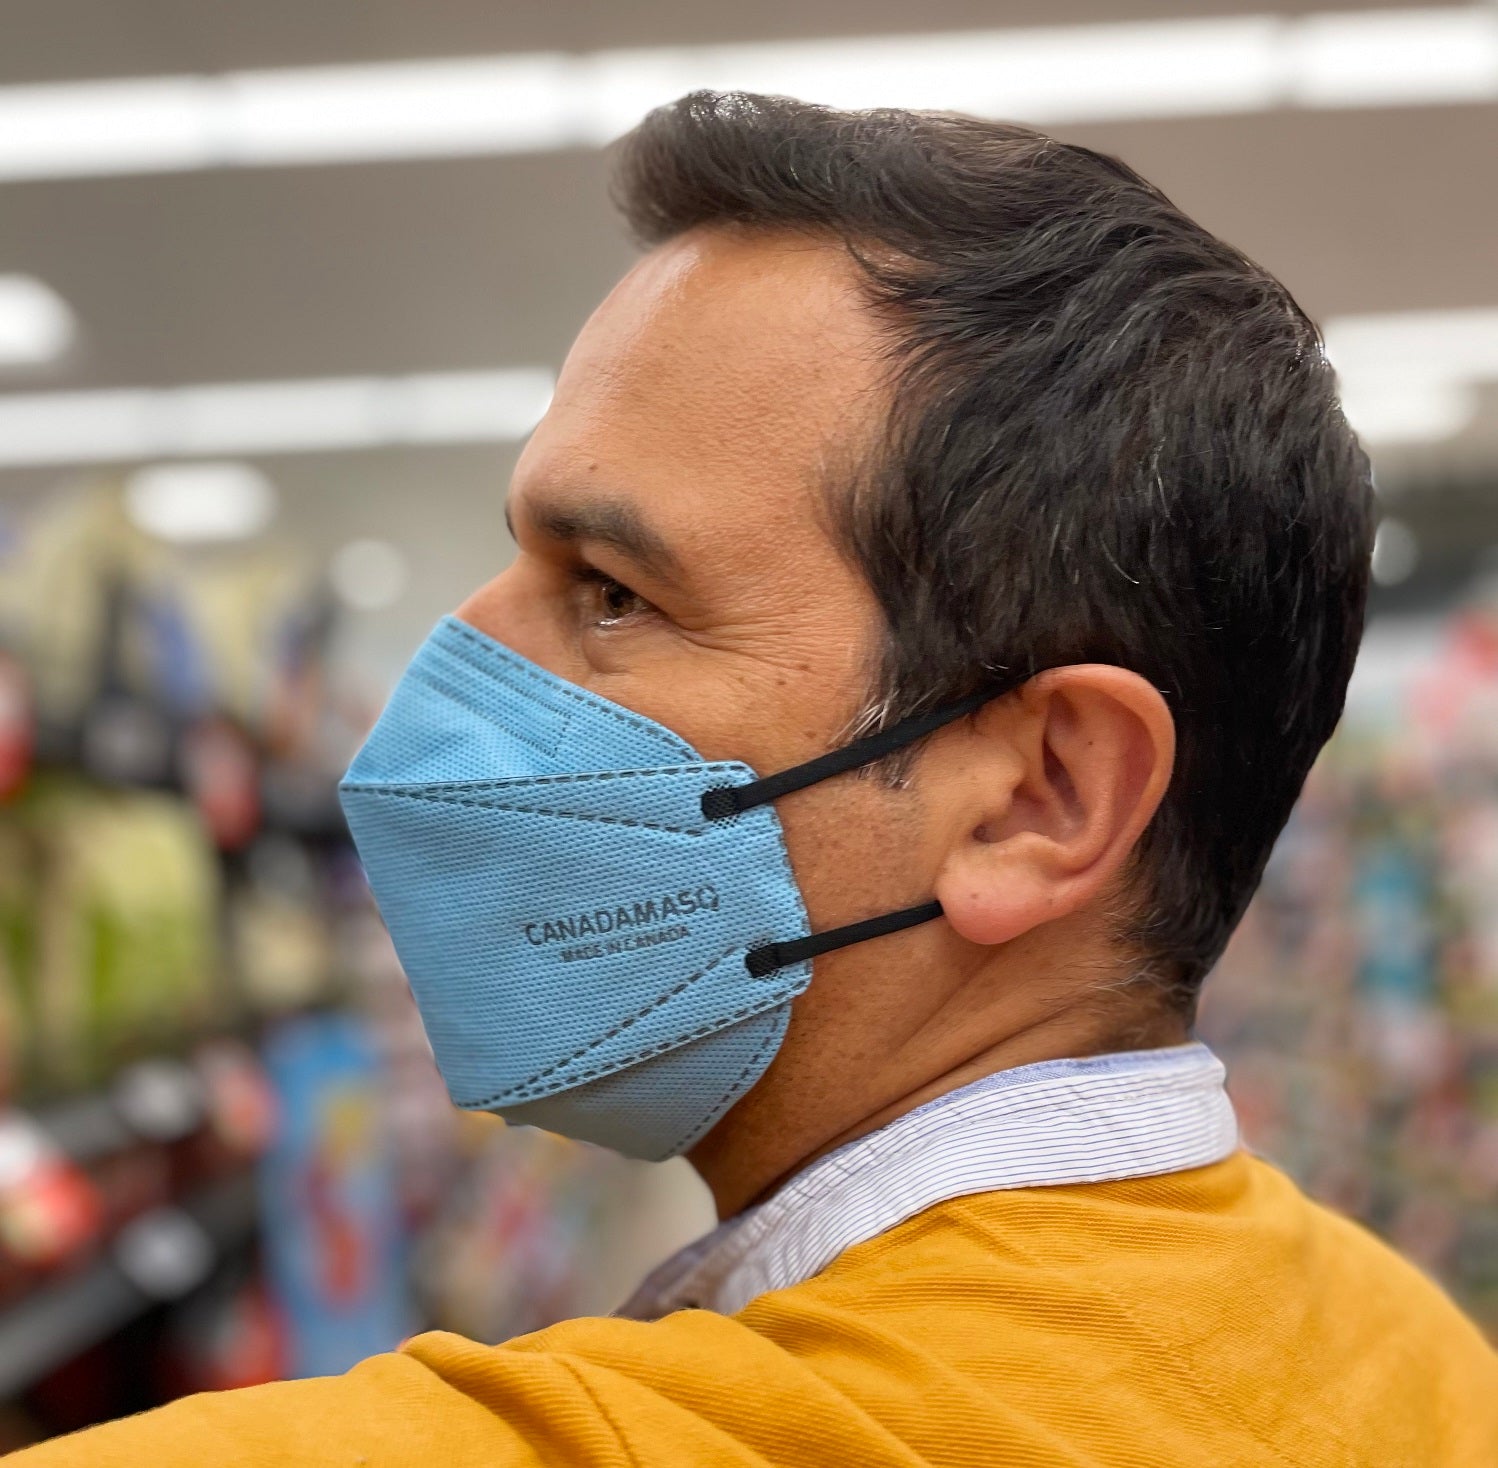 Man wearing Large Canada Masq blue and black CA-N95 respirator mask from Canada Strong